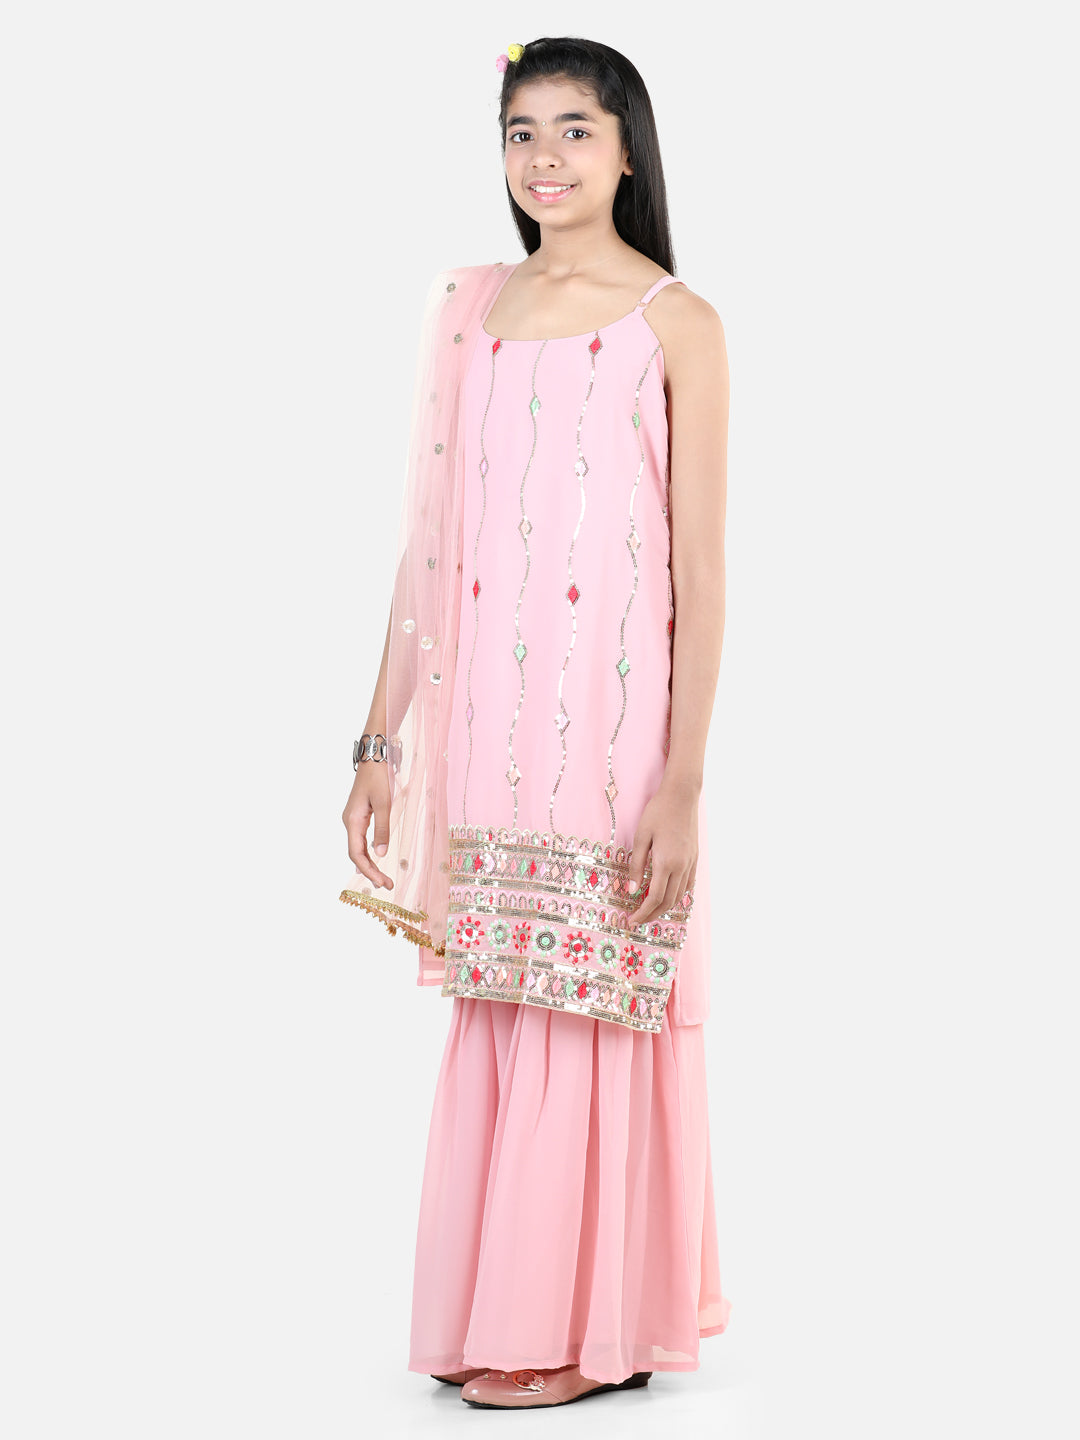 BownBee Traditional Wear Special Sleeveless Floral Embroidered Lace Detailed Kurta Sharara With Dupatta - Pink